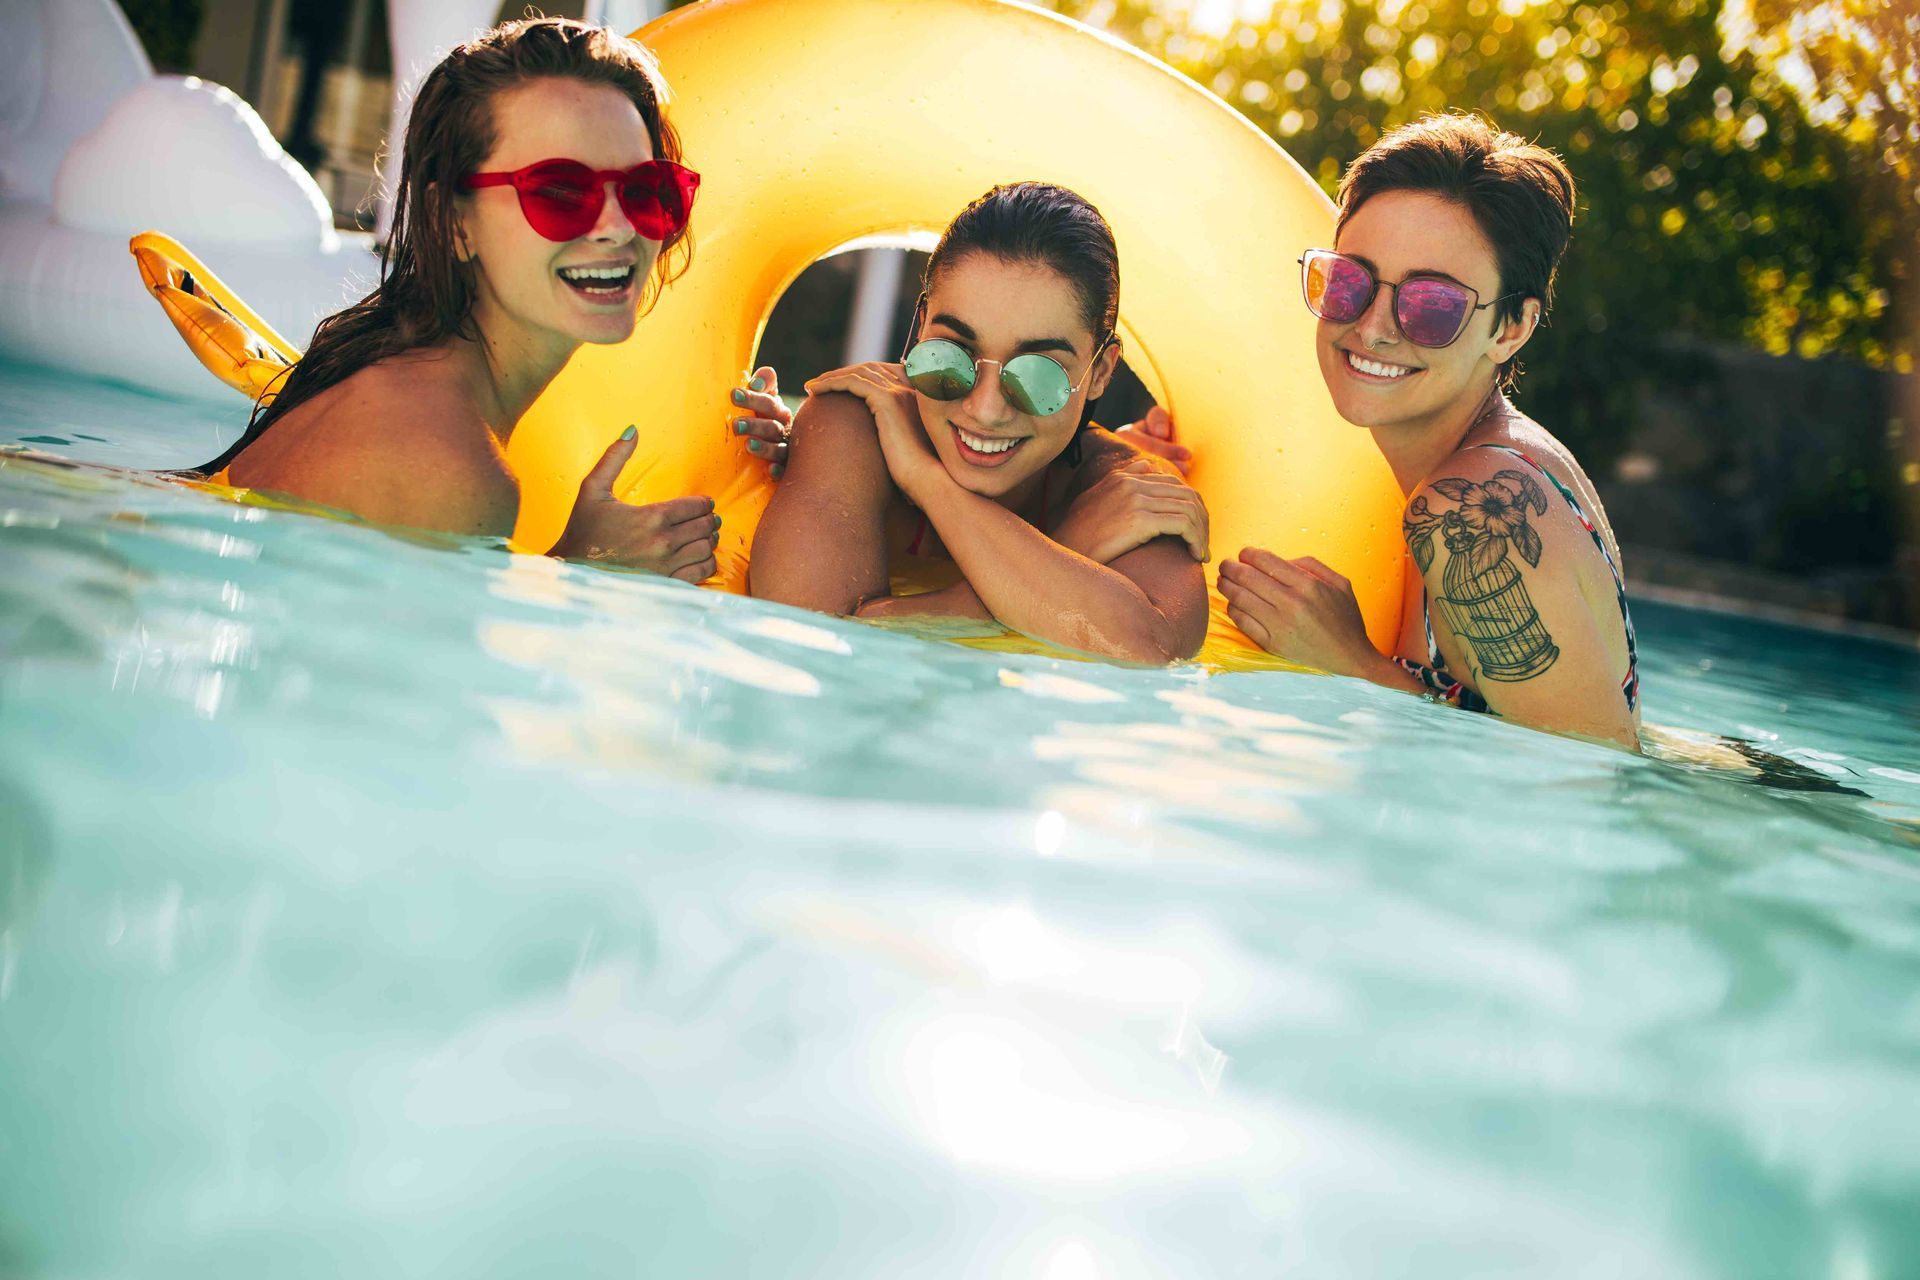 Three girls having a great time in their pool outside, smiling